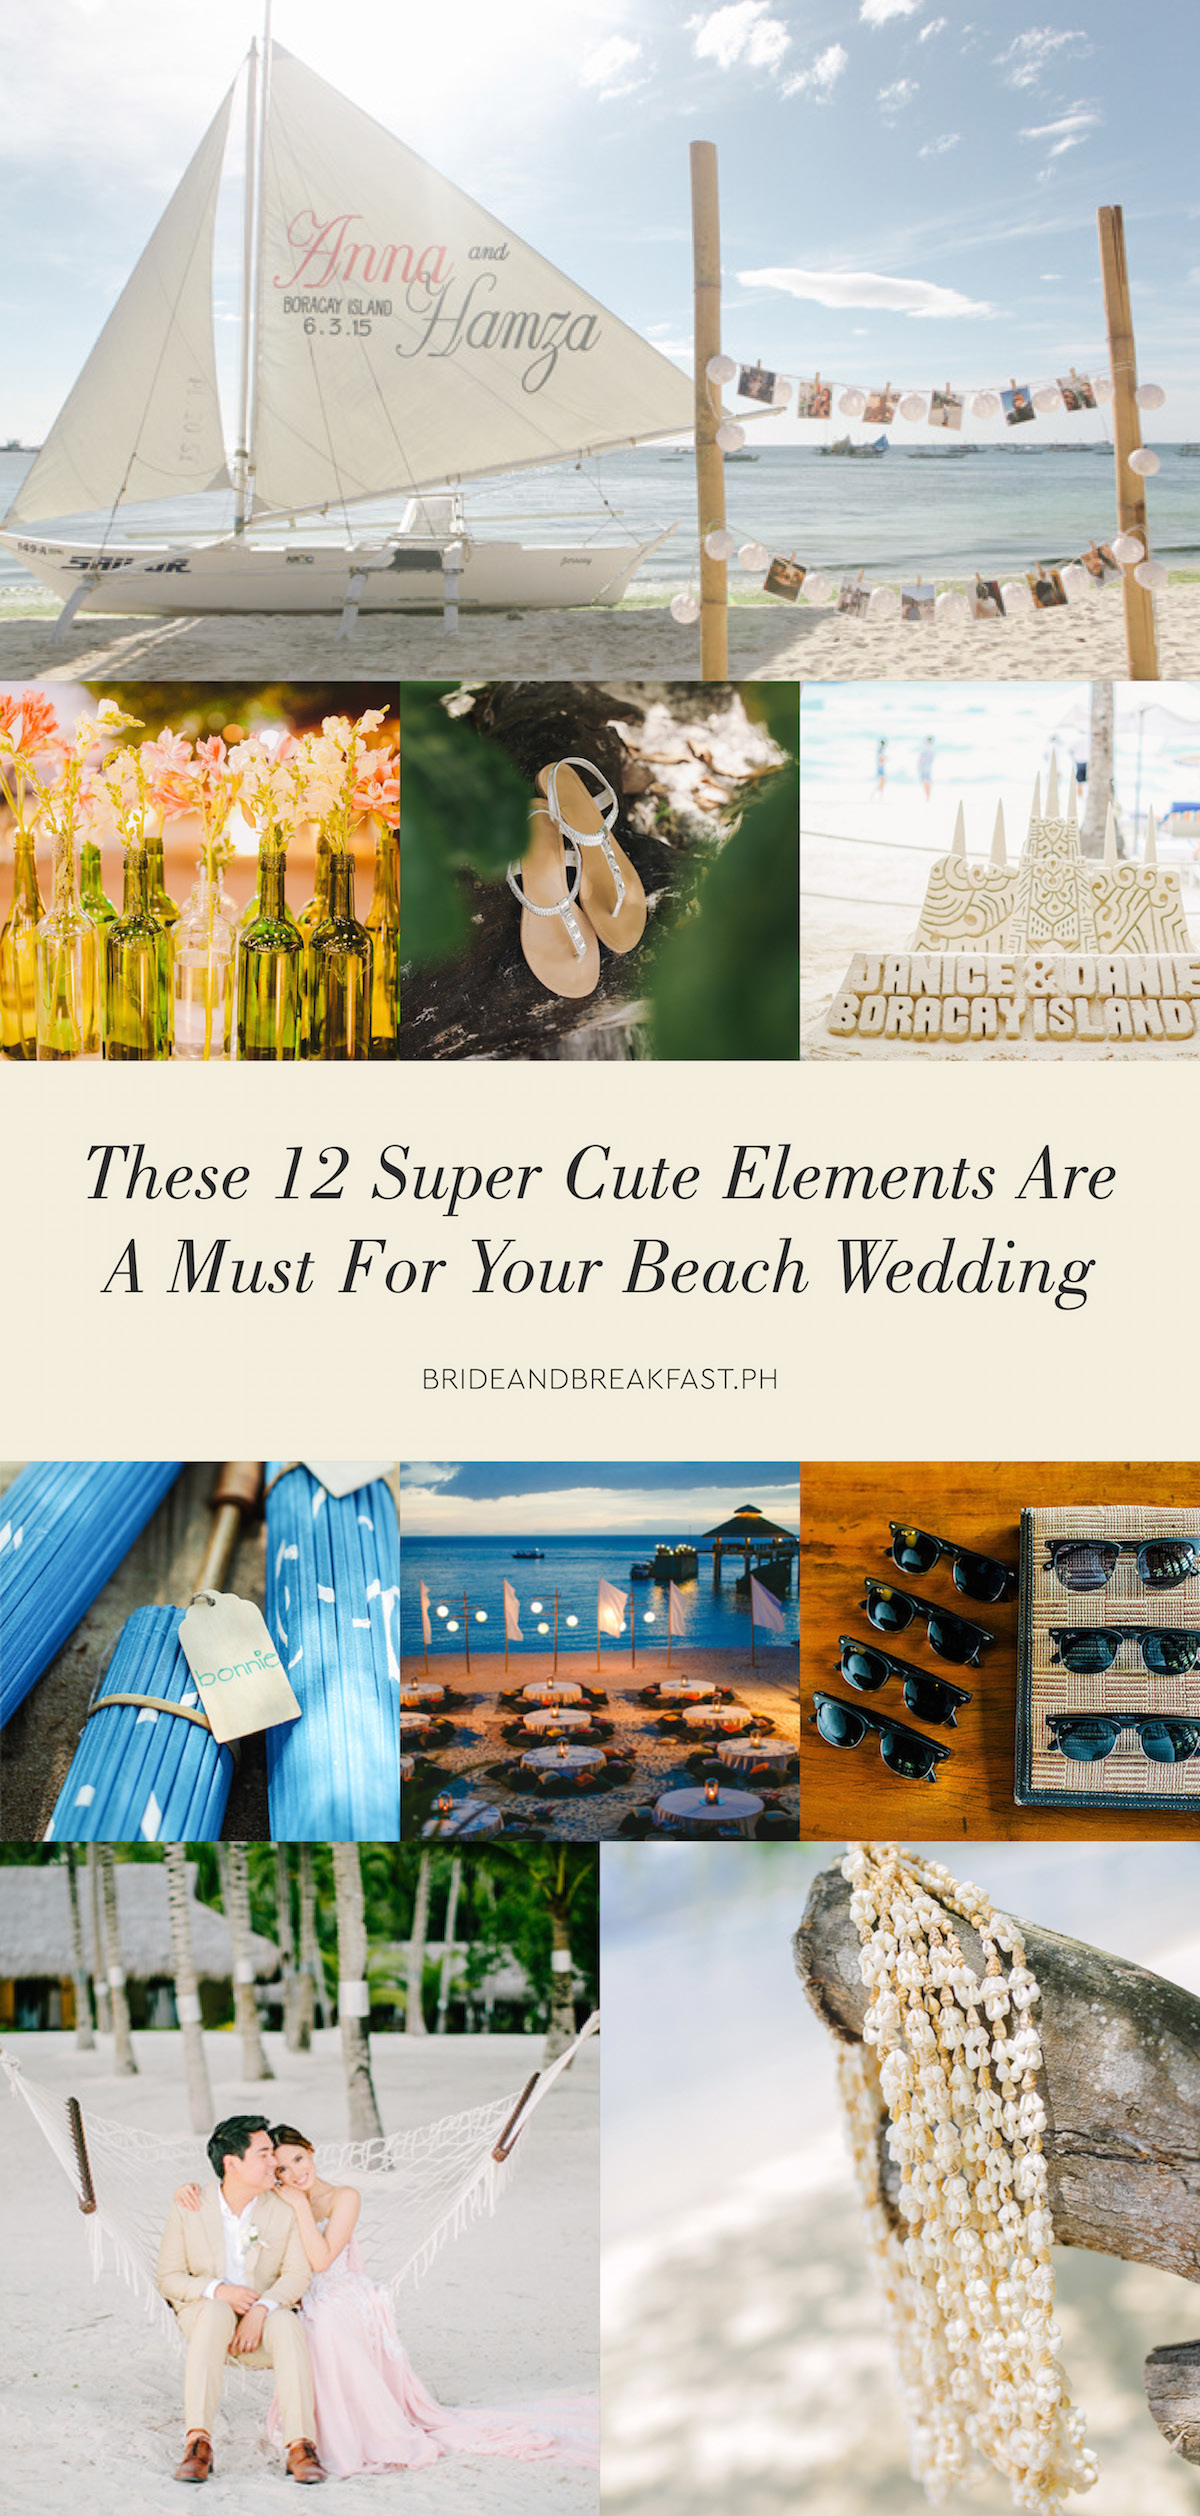 These 12 Super Cute Elements Are A Must For Your Beach Wedding